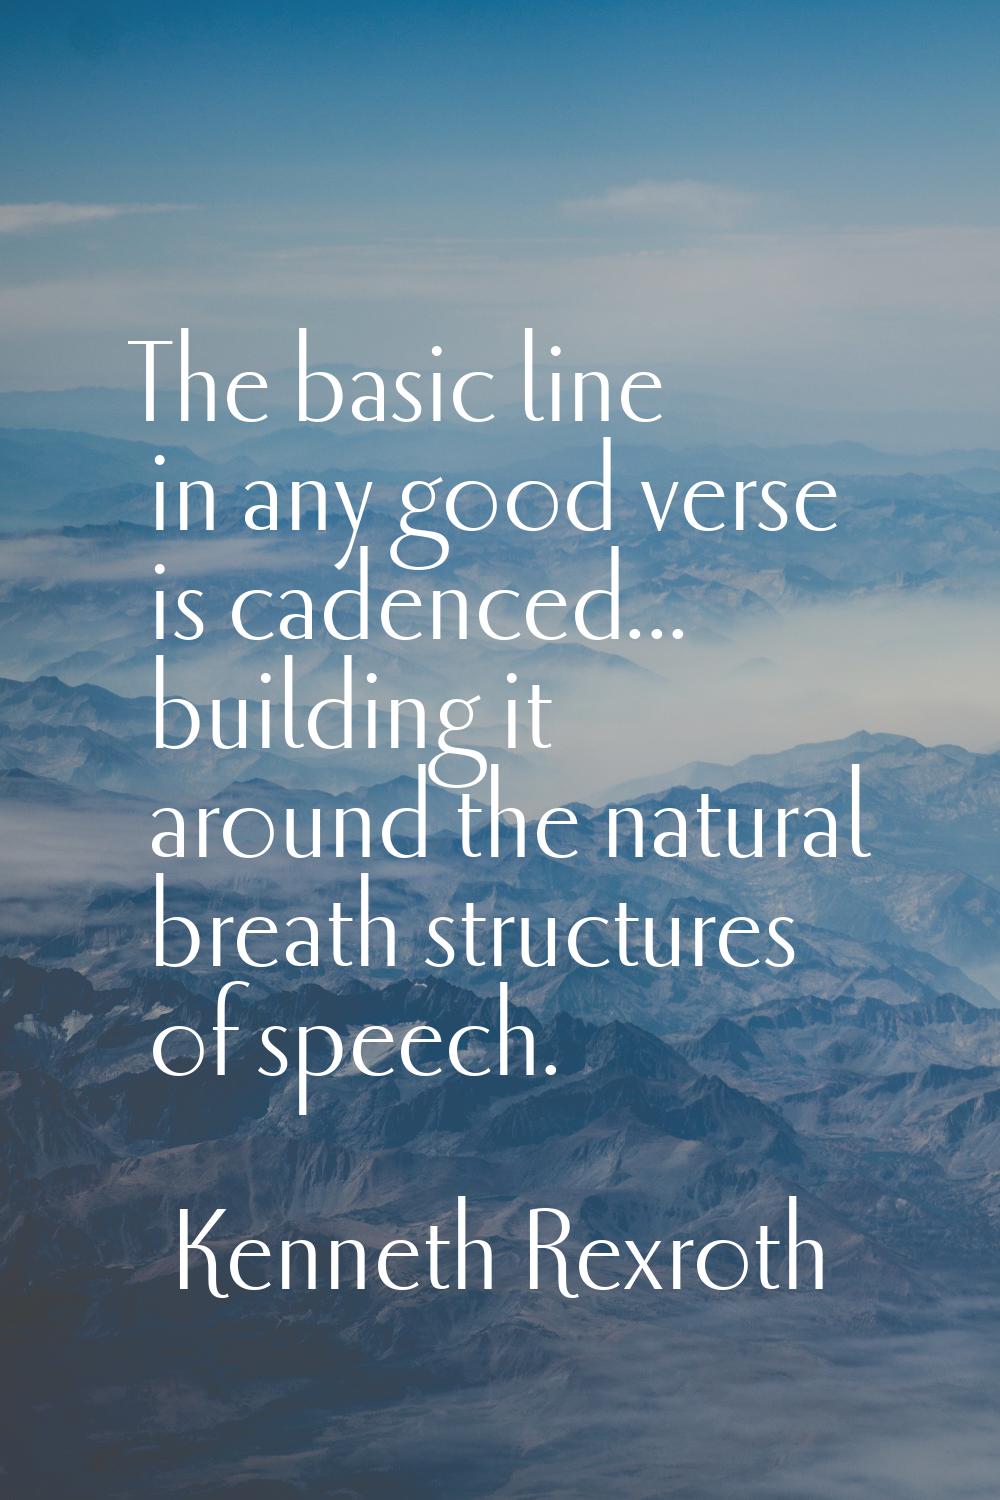 The basic line in any good verse is cadenced... building it around the natural breath structures of